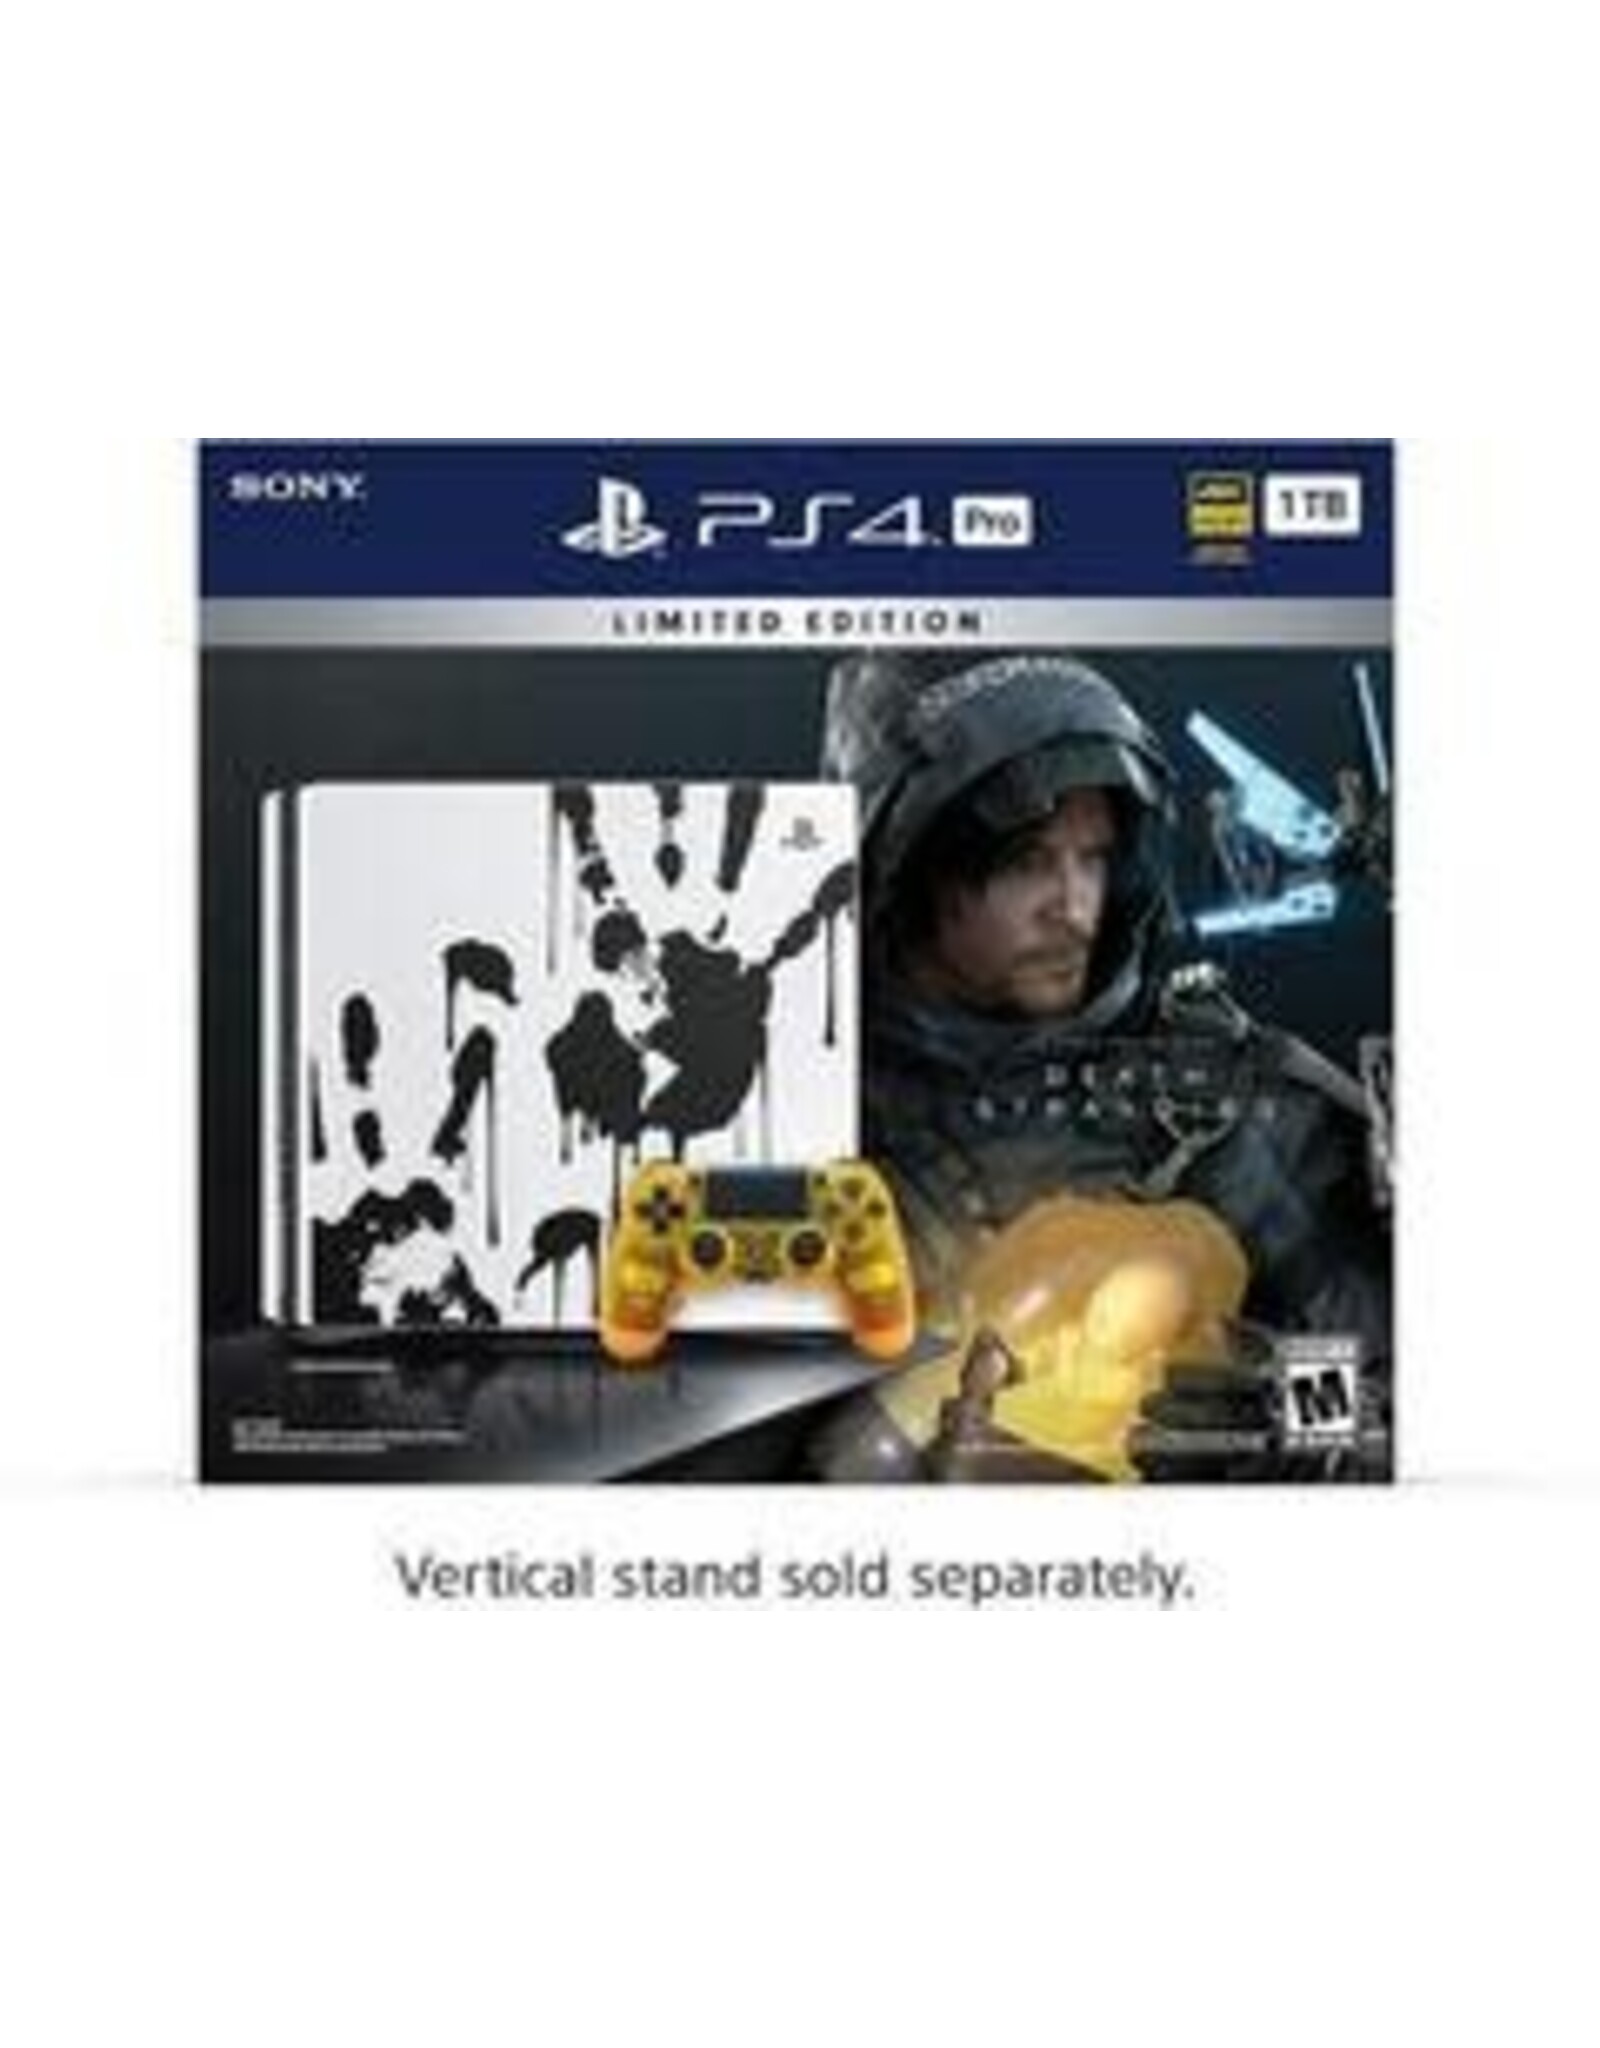 Playstation 4 PS4 Playstation 4 Pro 1TB Console Death Stranding Bundle (CiB, Cosmetic Damage, Includes Physical Copy of Game)